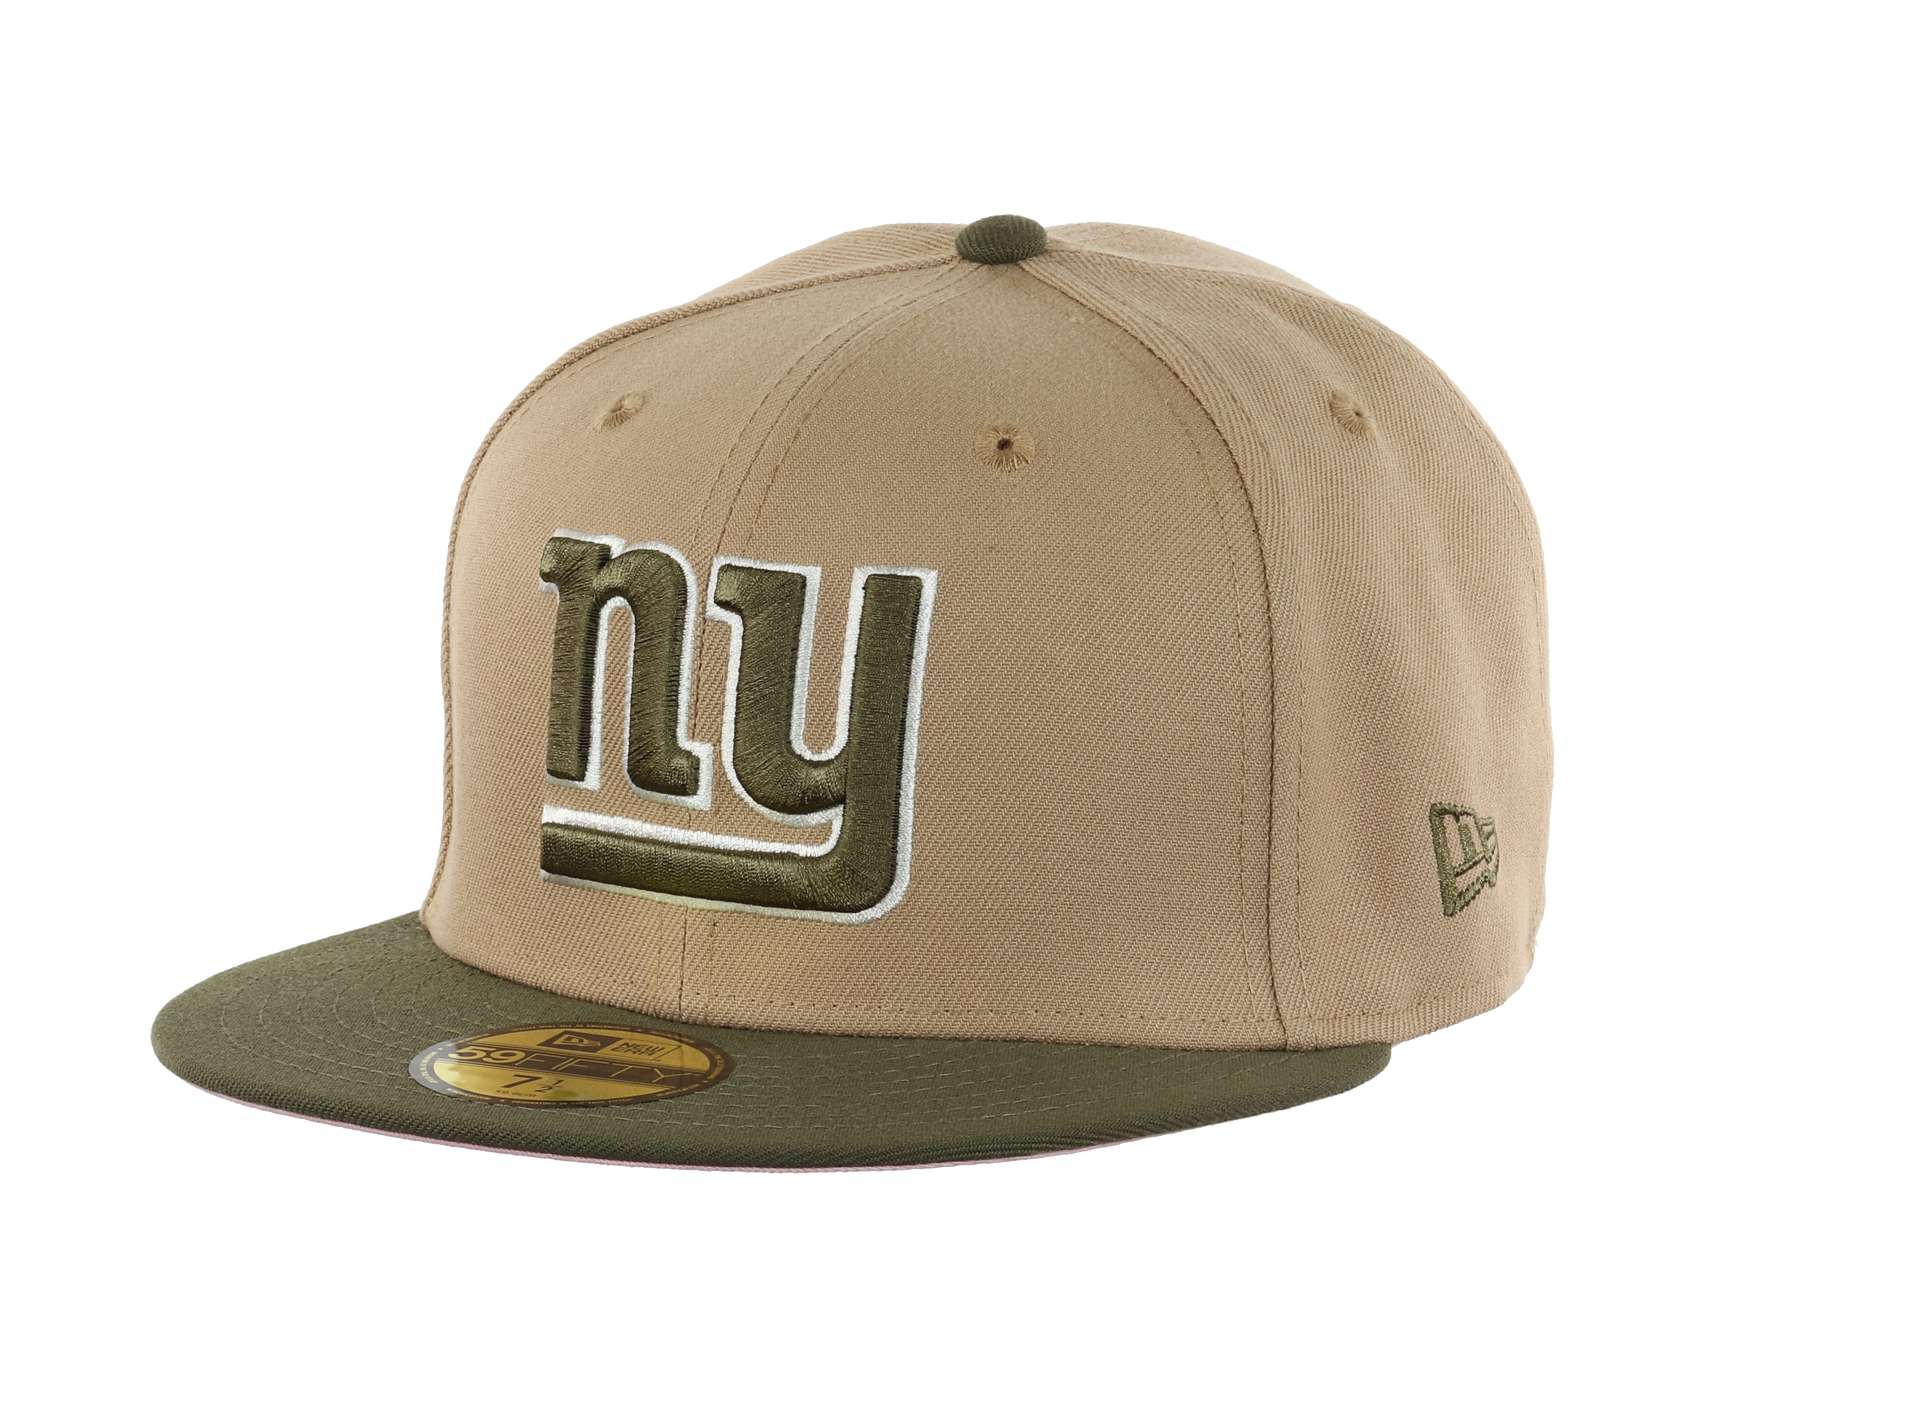 New York Giants NFL Pro Bowl Hawaii 1995 Sidepatch Camel Olive 59Fifty Basecap New Era